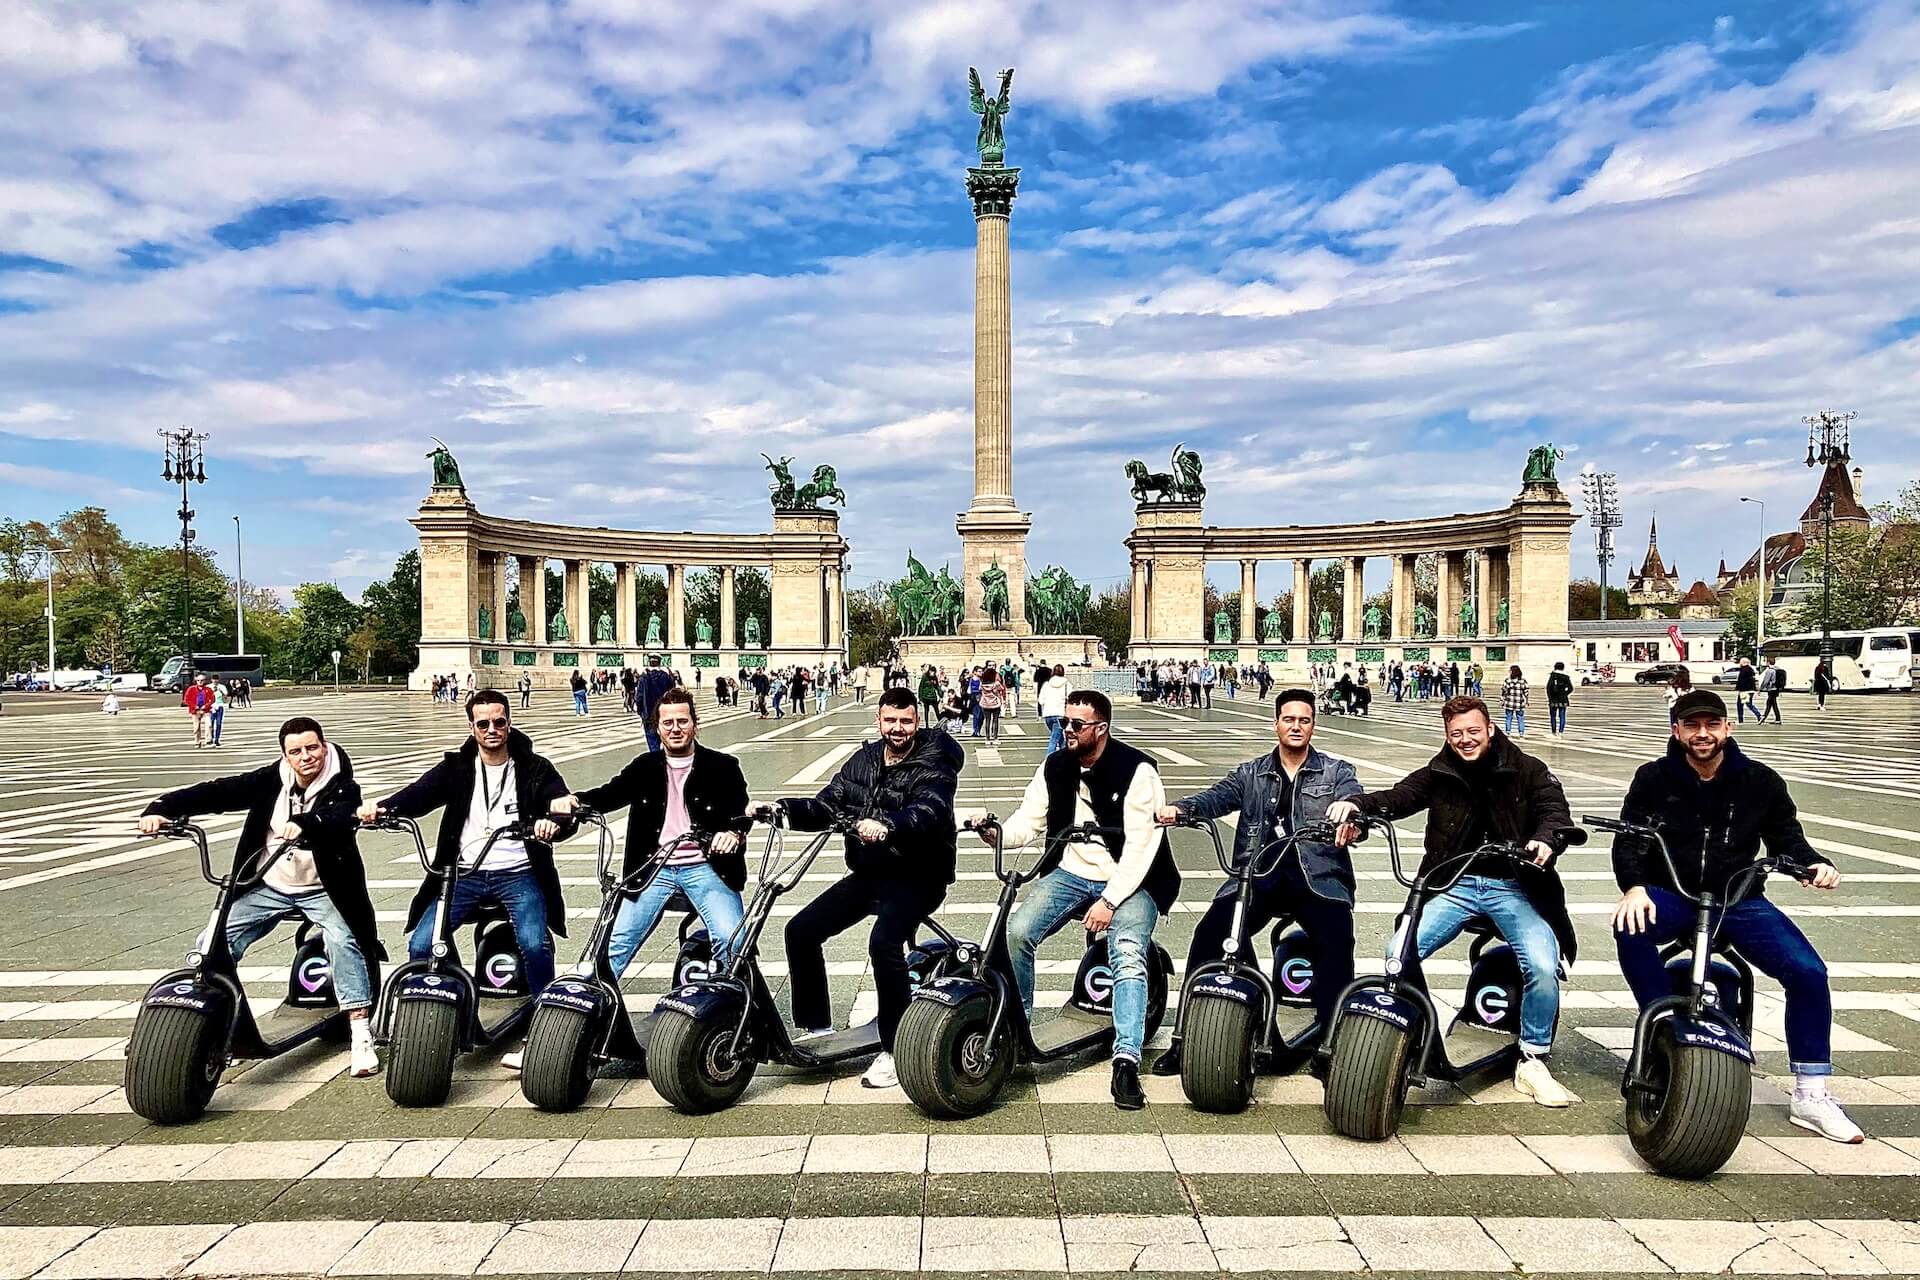 People posing on e-scooters in front of Heroes' Square monument.